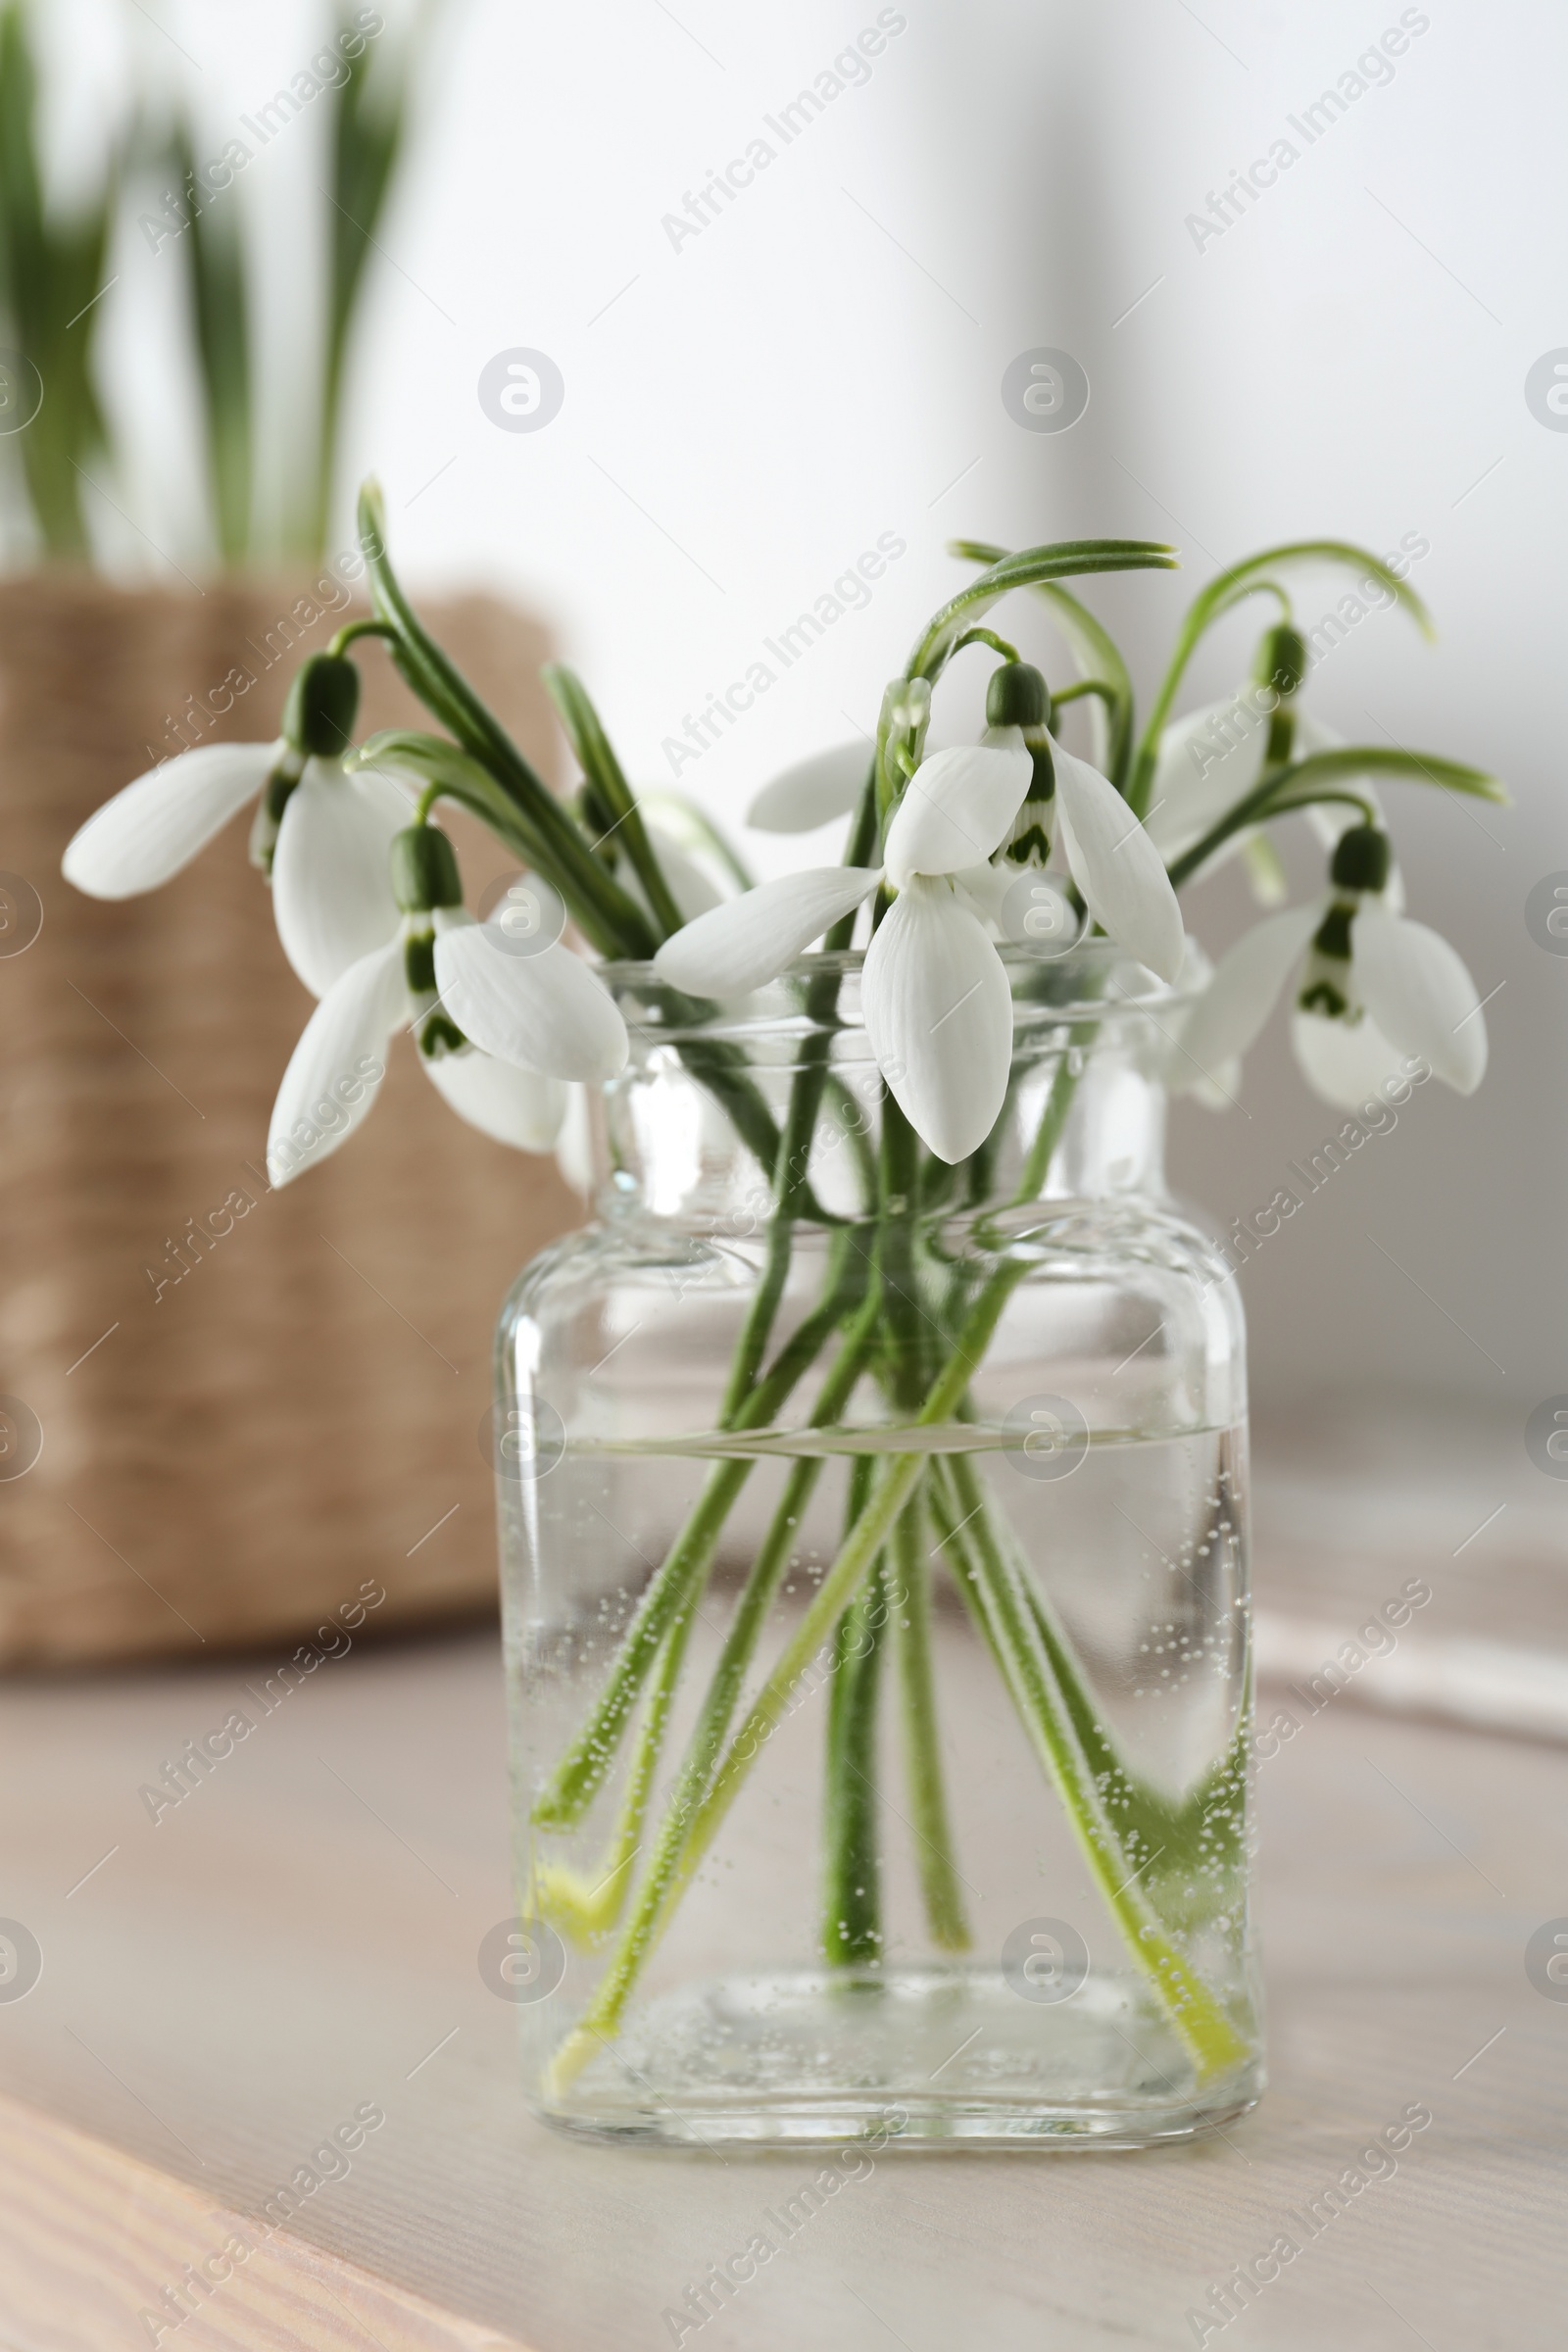 Photo of Beautiful snowdrop flowers in glass jar on wooden table